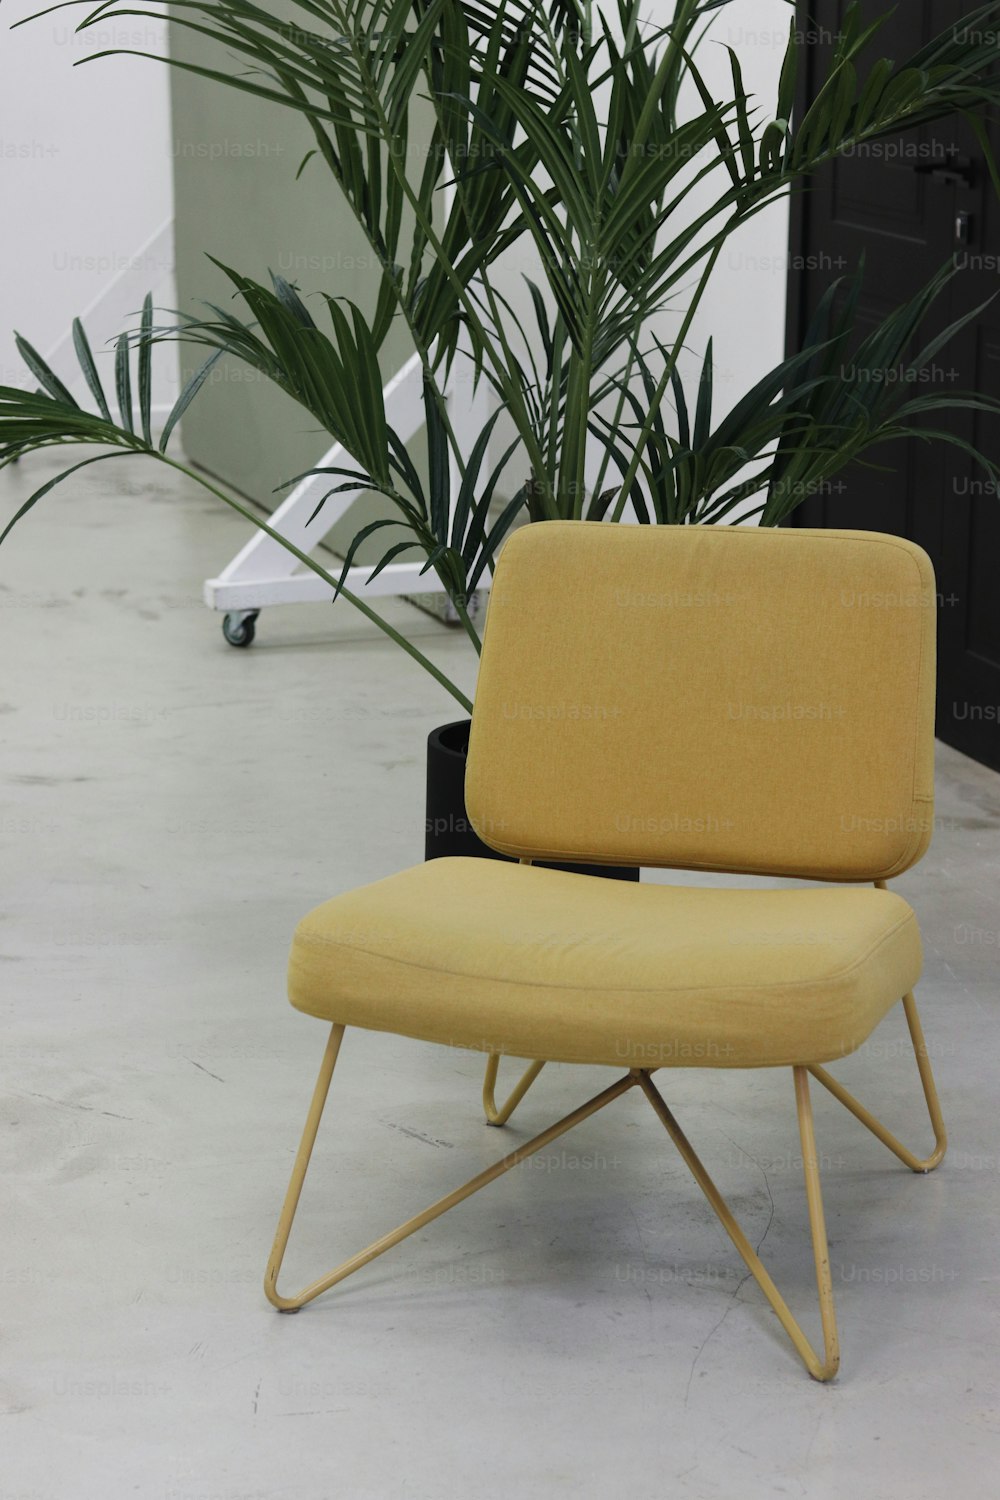 a yellow chair sitting in front of a plant